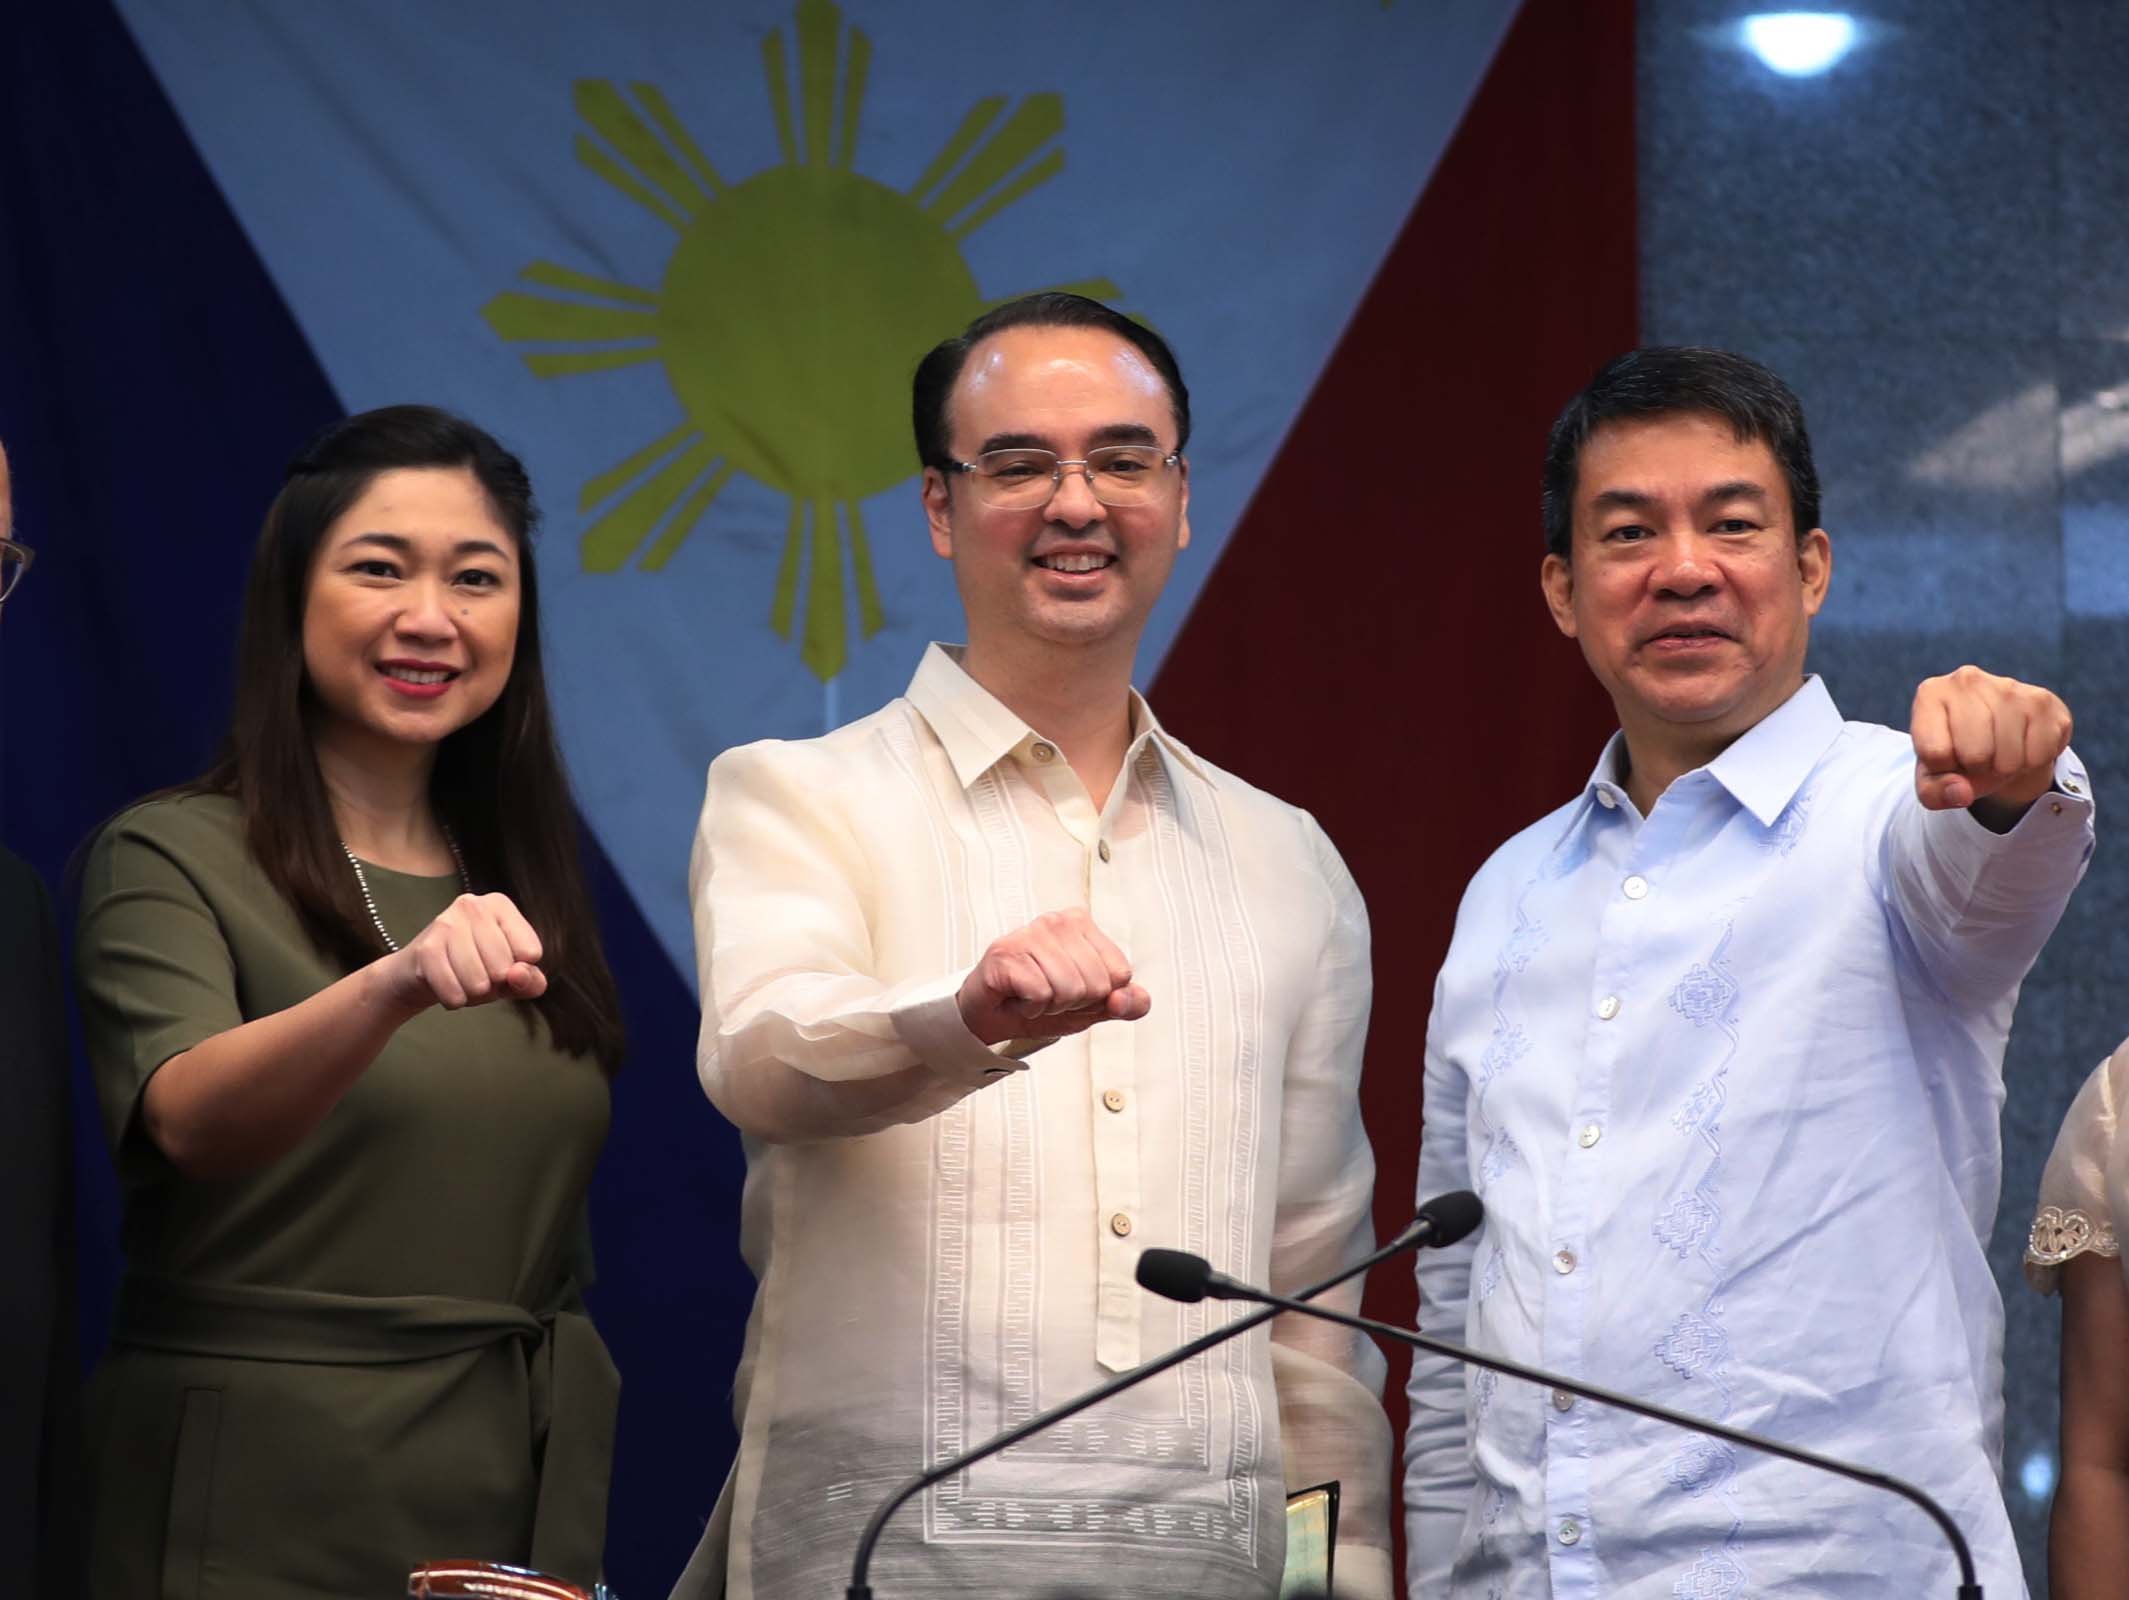 FIST POSE. Sen. Aquilino Pimentel III poses with newly confirmed Foreign Affairs Sec. Alan Peter Cayetano and wife, Lani